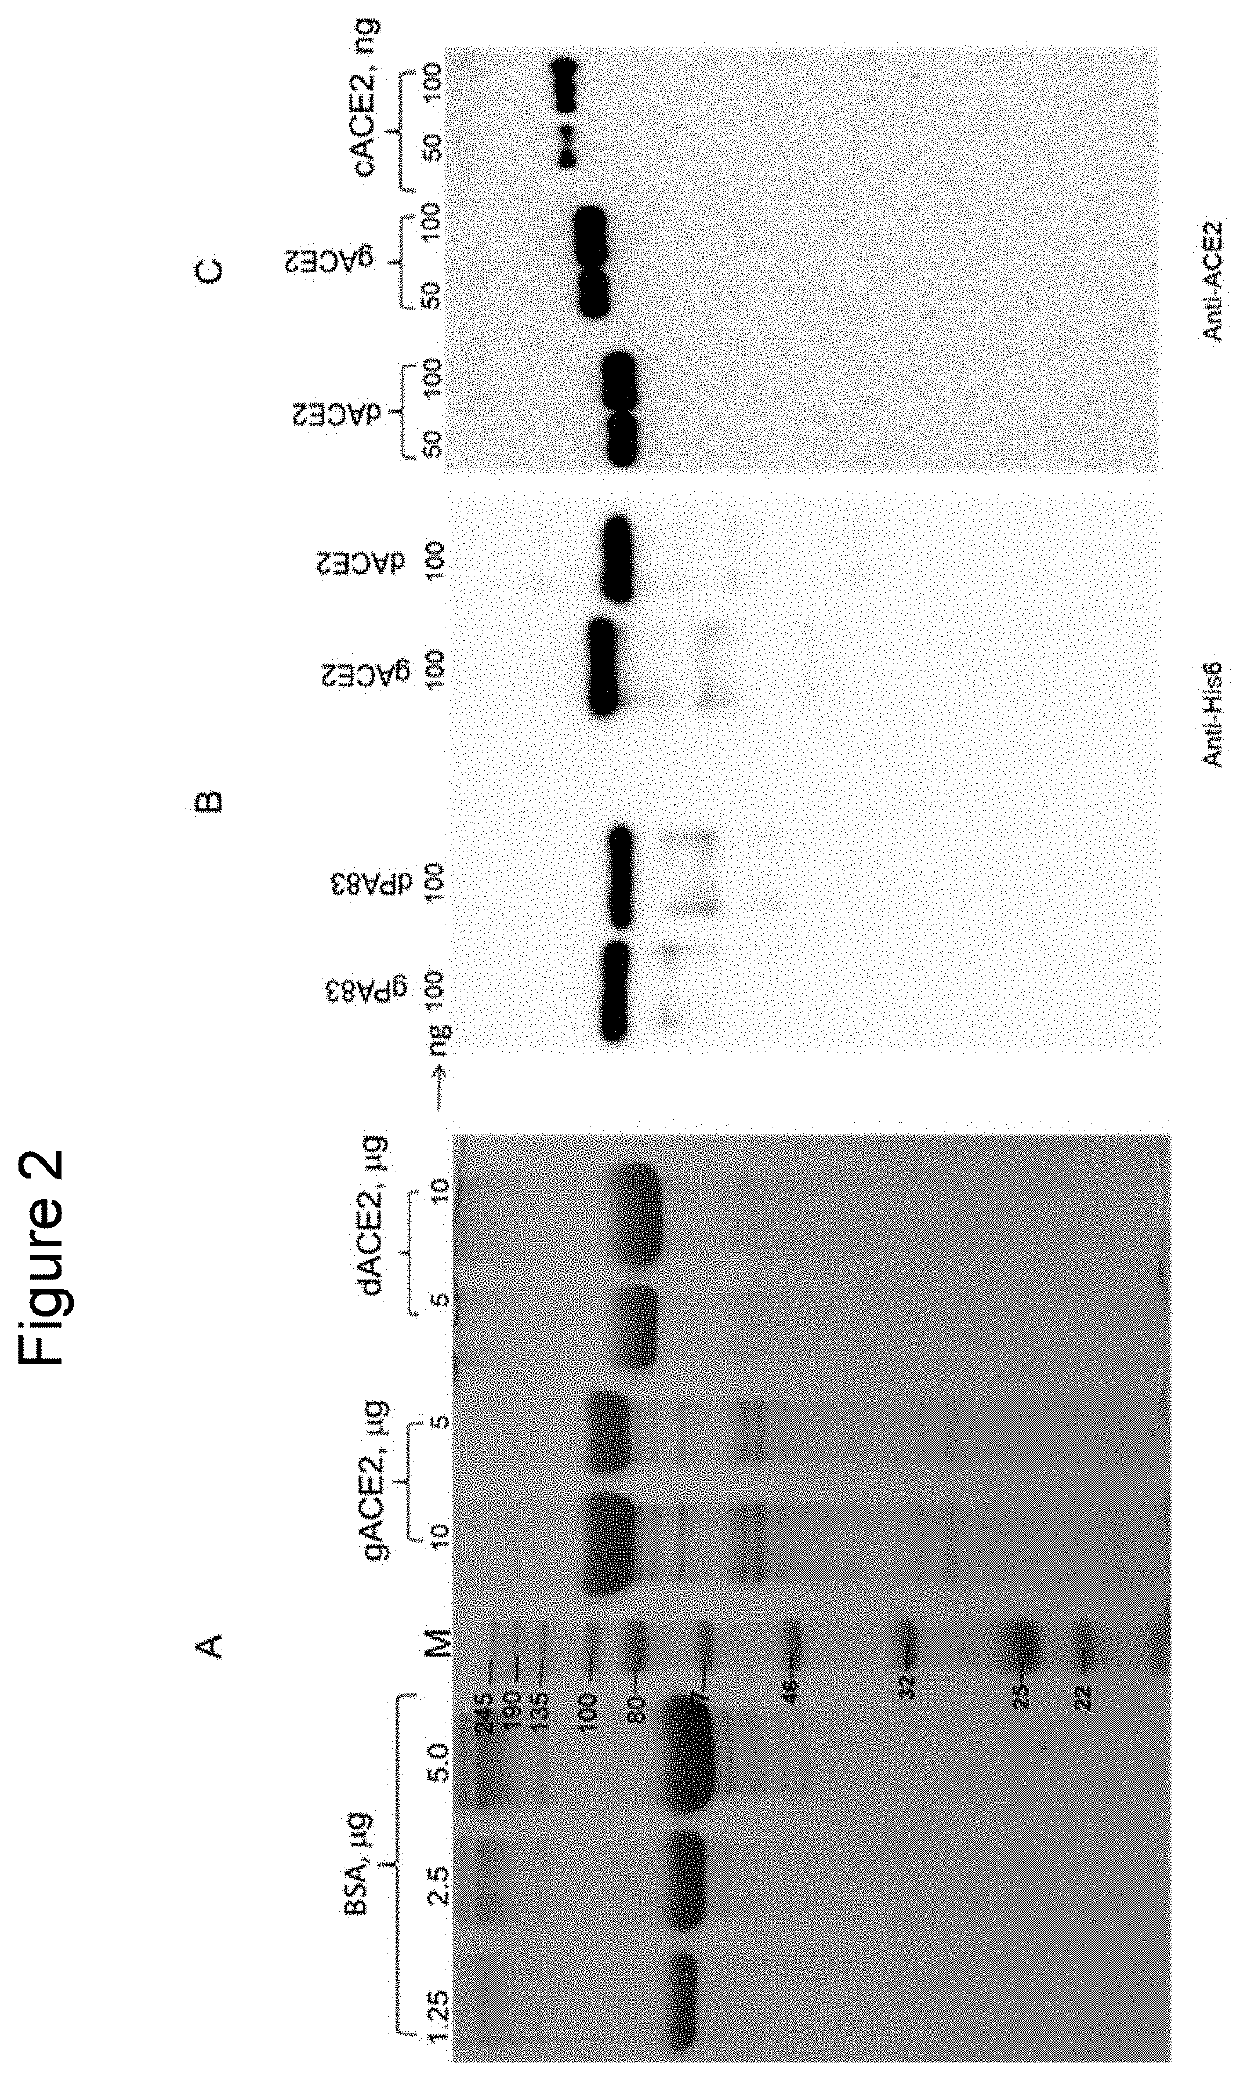 Engineering, production and characterization of plant produced, soluble human angiotensin converting enzyme-2 as a therapeutic target in covid-19